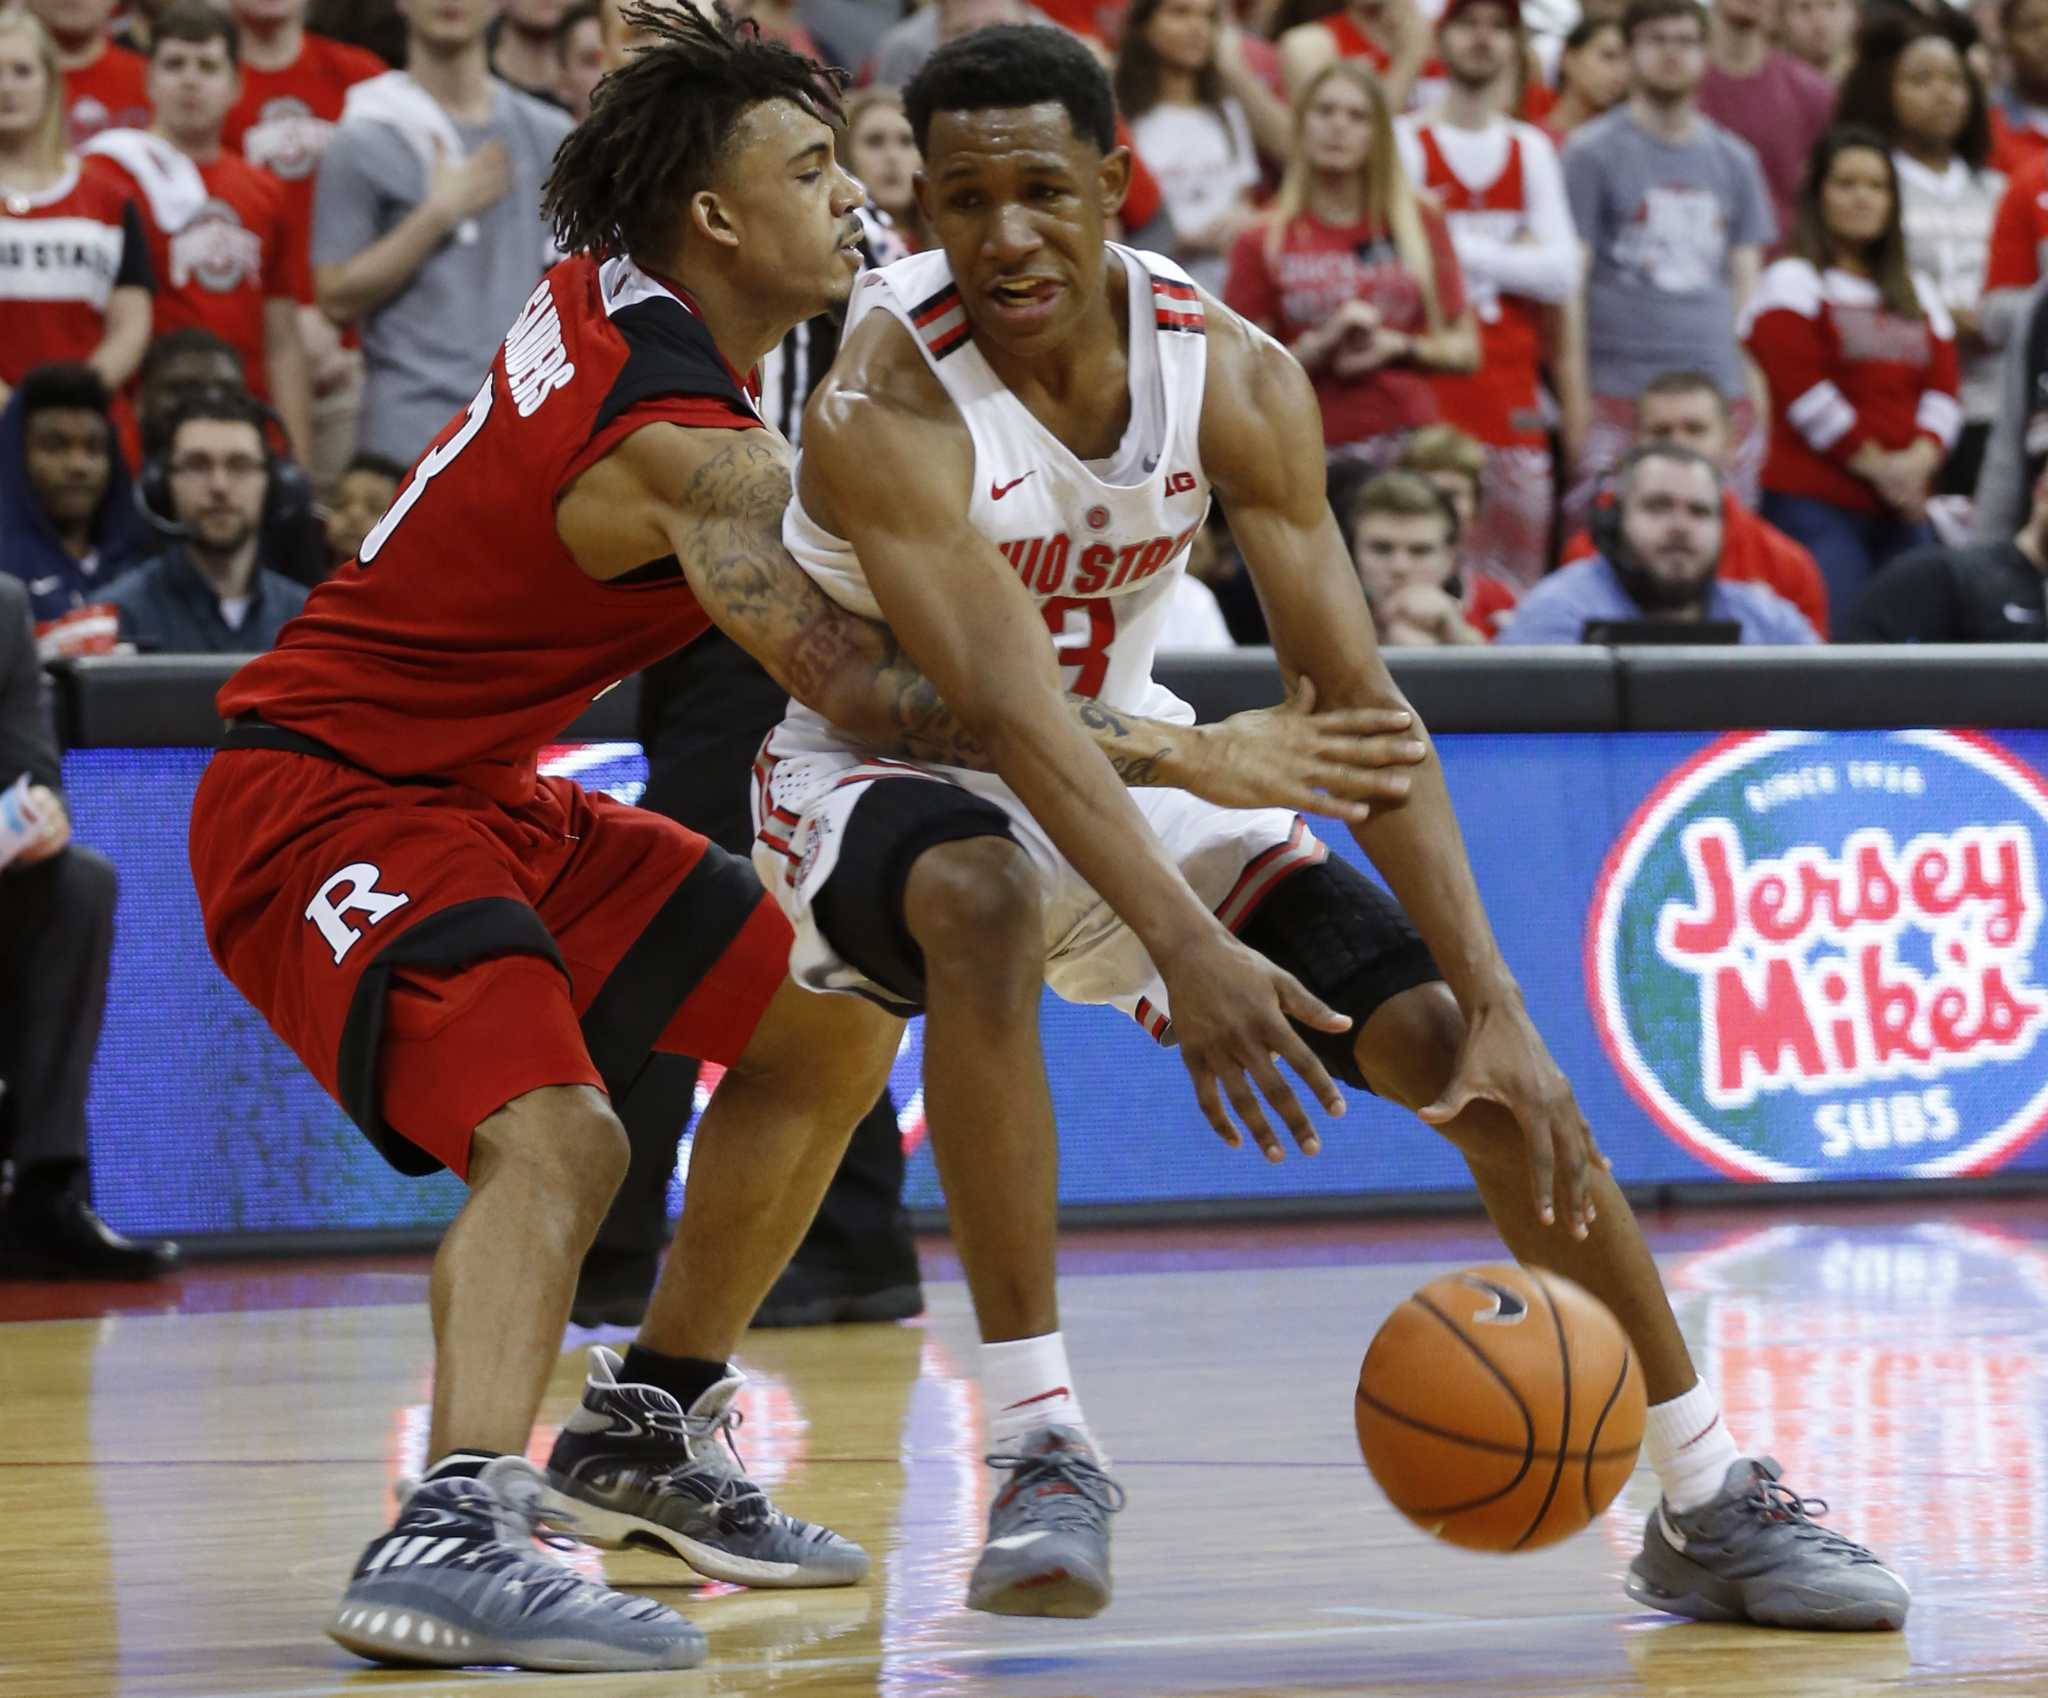 Louisville must vacate basketball title, NCAA denies appeal